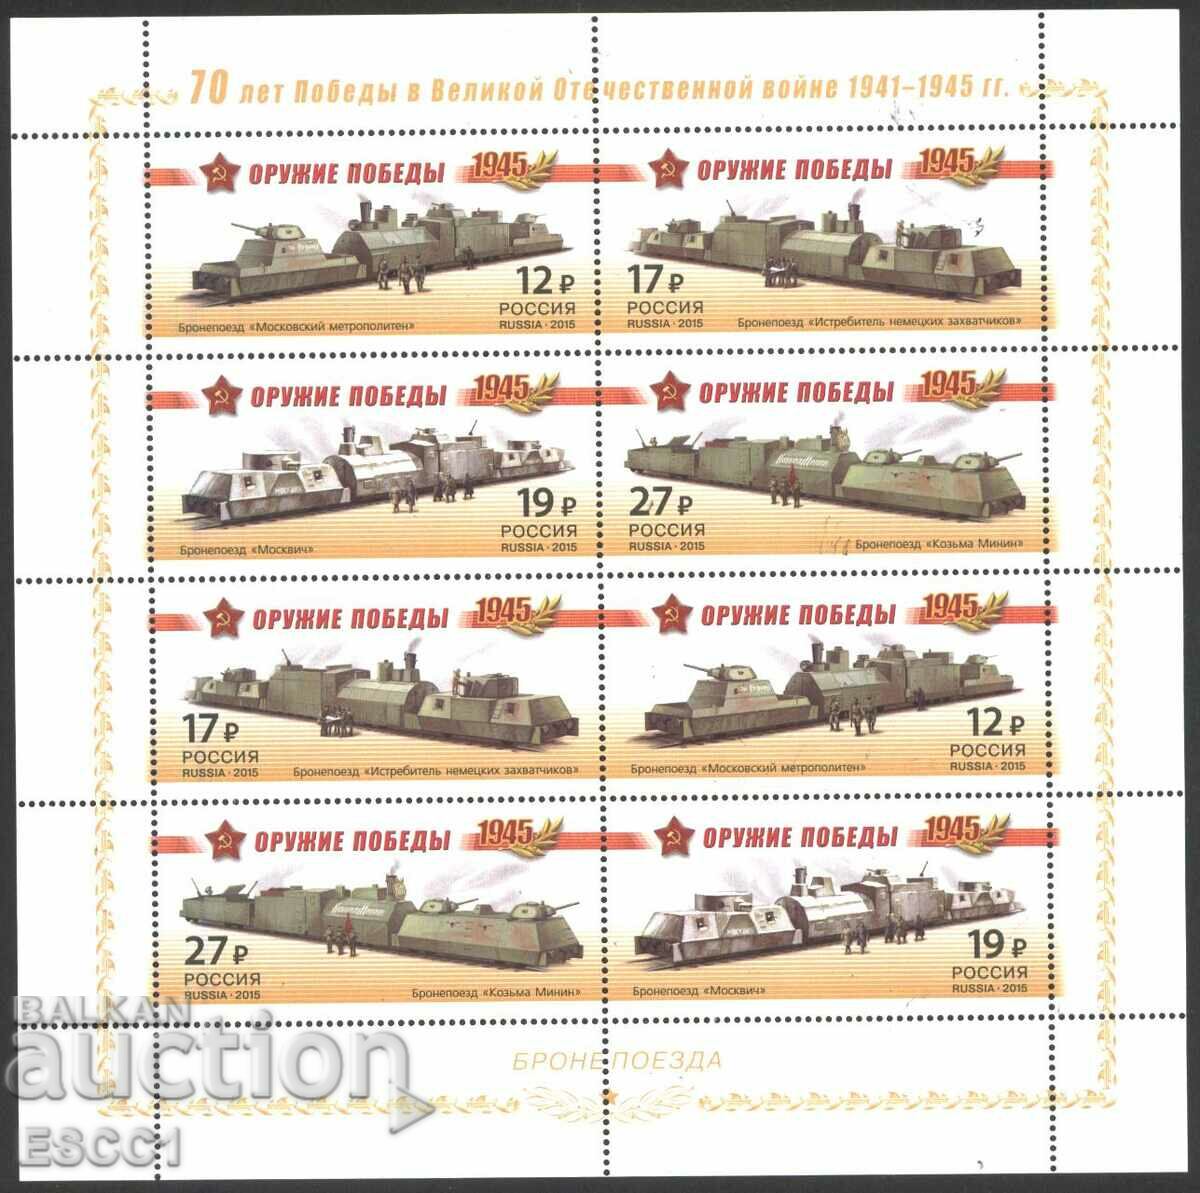 Clean stamps small sheet Weapons of Victory Trains 2015 Russia